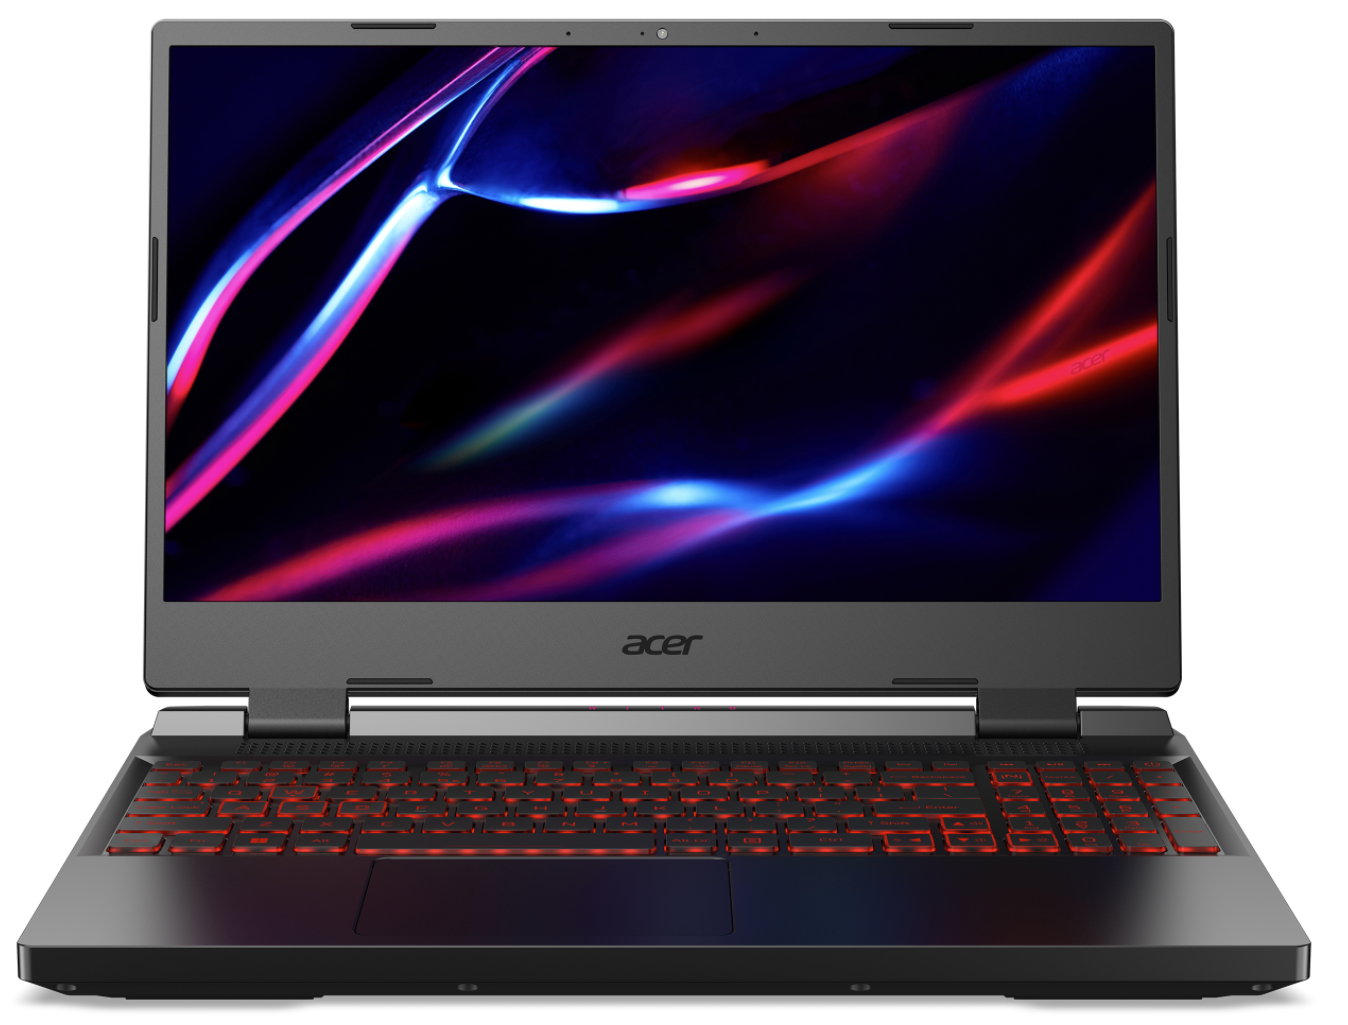 Acer presents its new Gaming 37 notebooks at CES